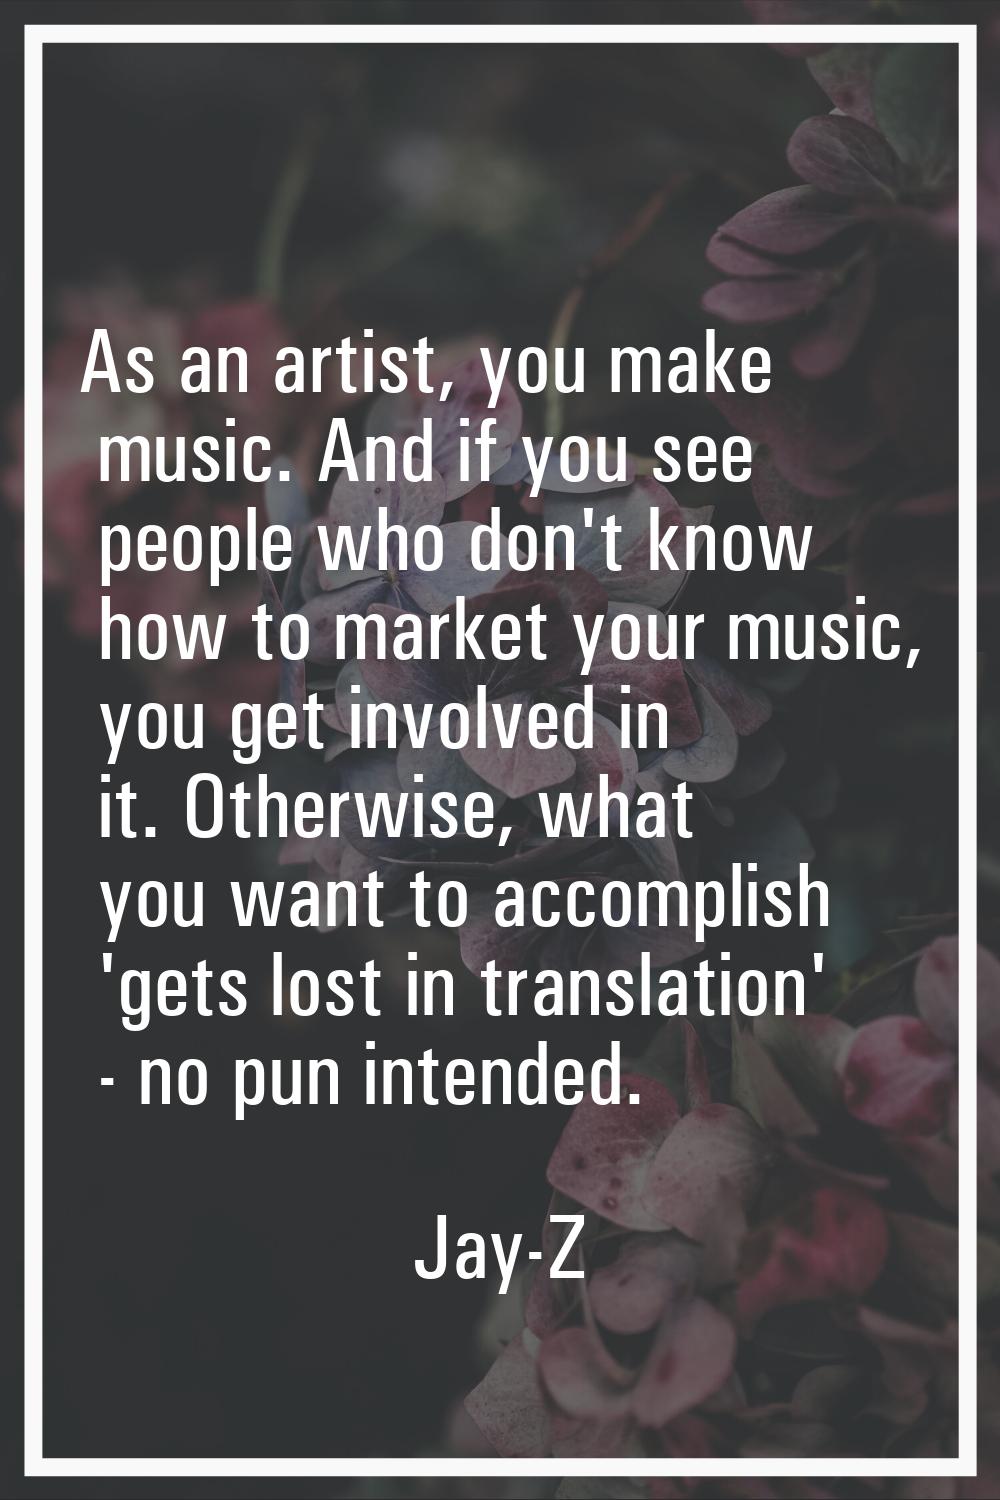 As an artist, you make music. And if you see people who don't know how to market your music, you ge